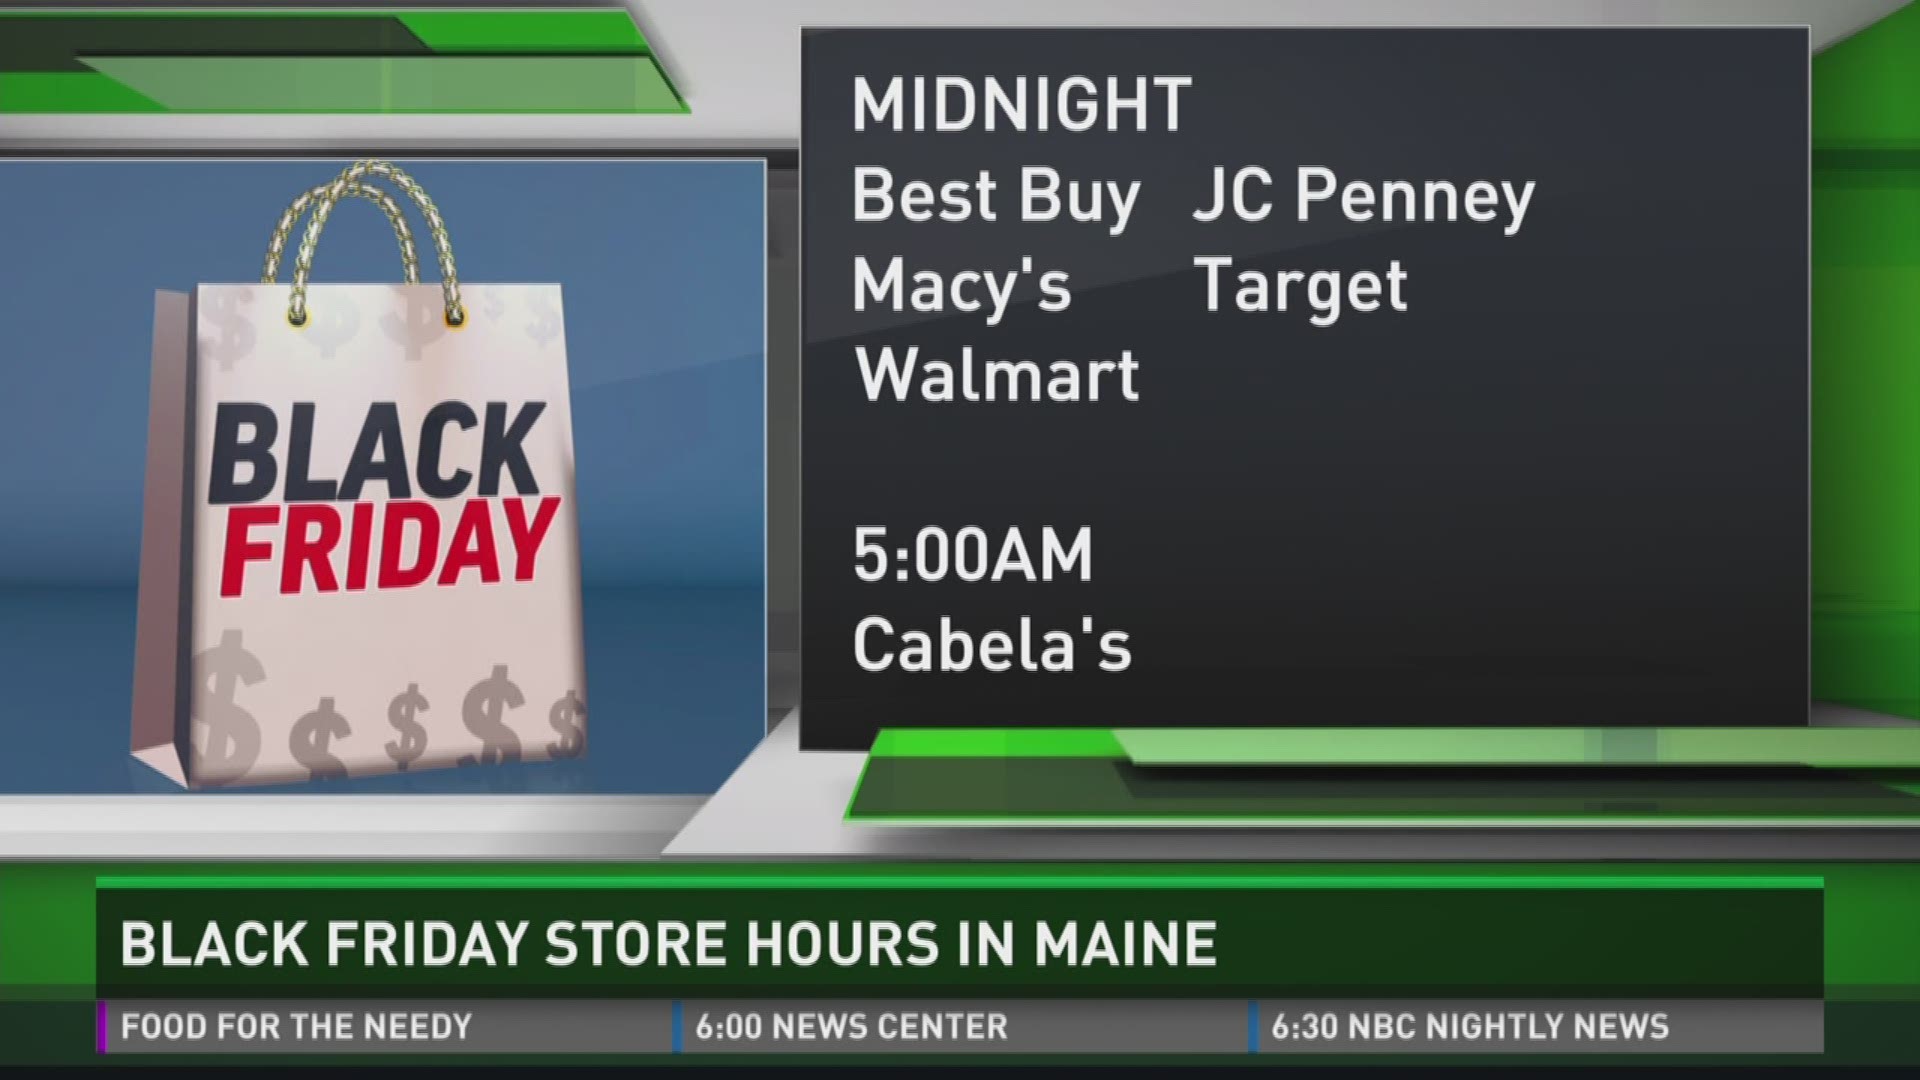 Black Friday store hours in Maine